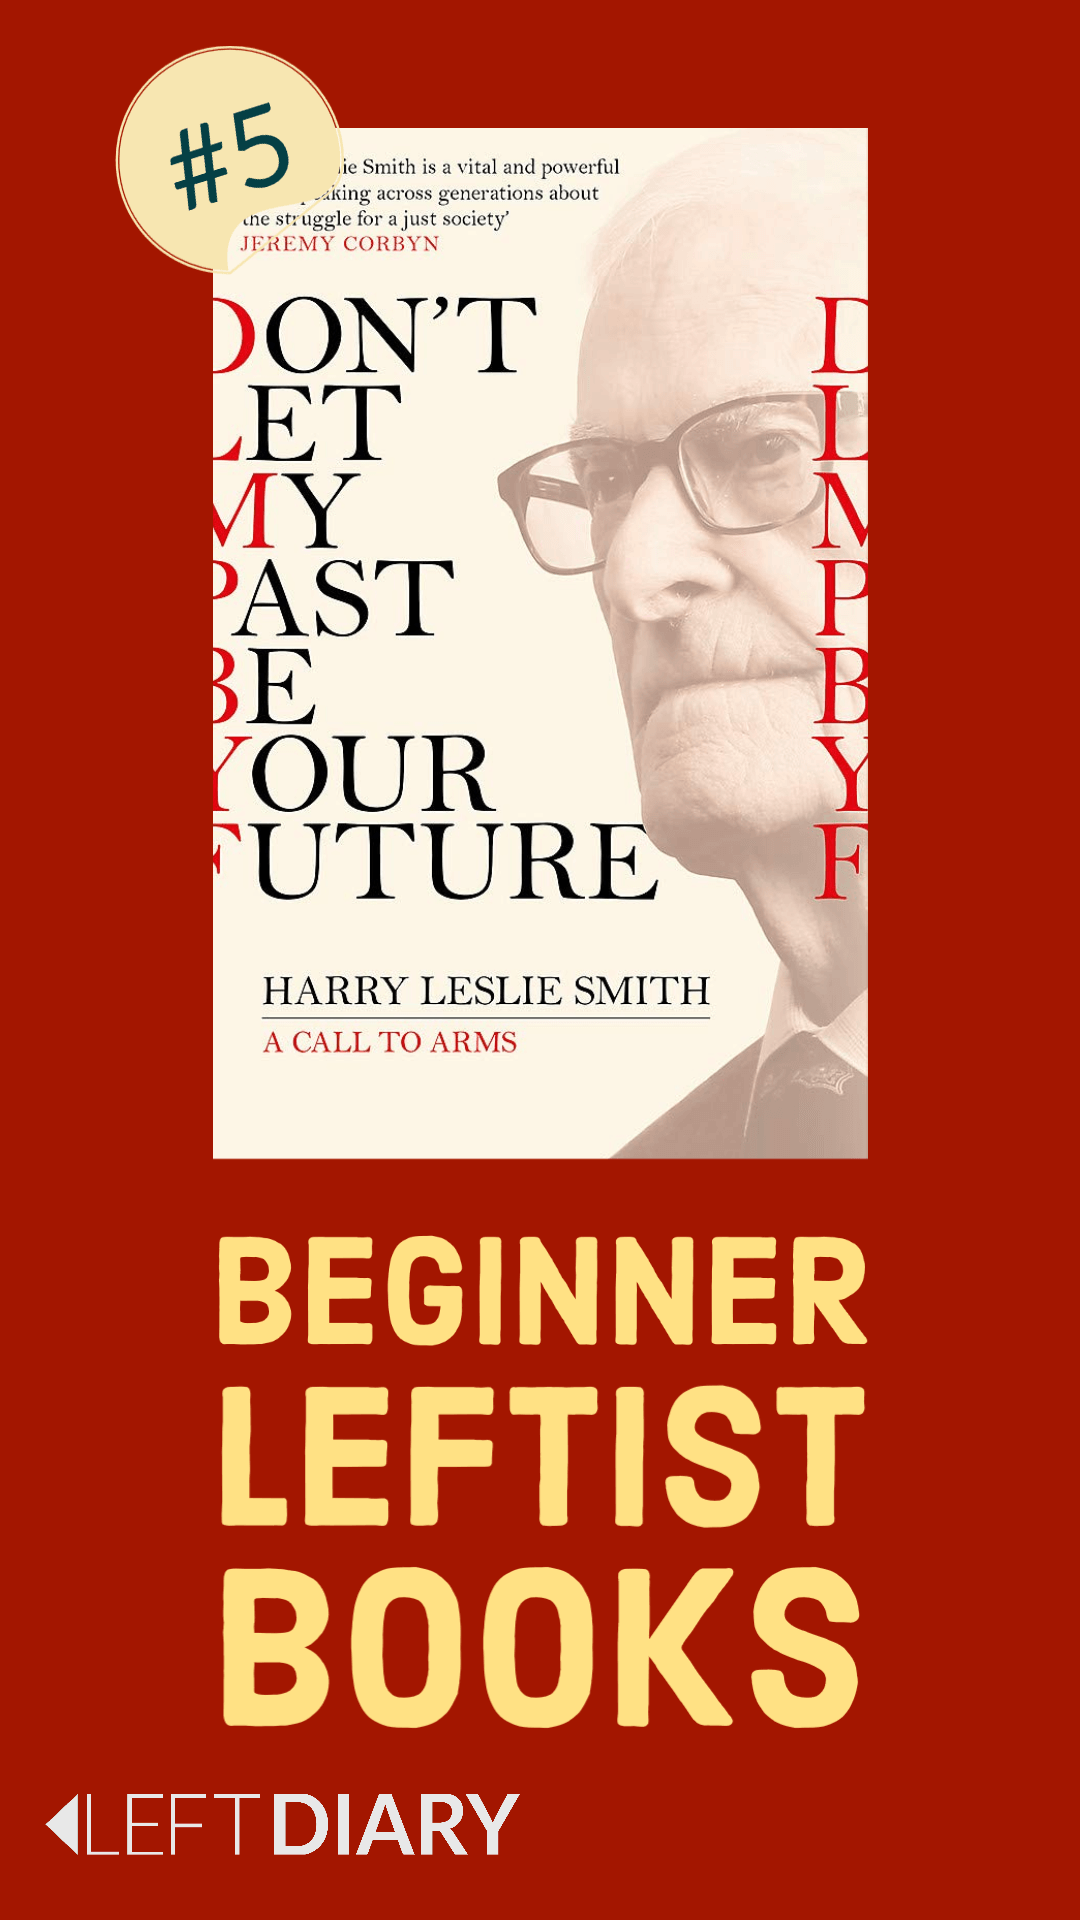 Beginner leftist reading guide Don't let my past be your future — Harry Leslie Smith